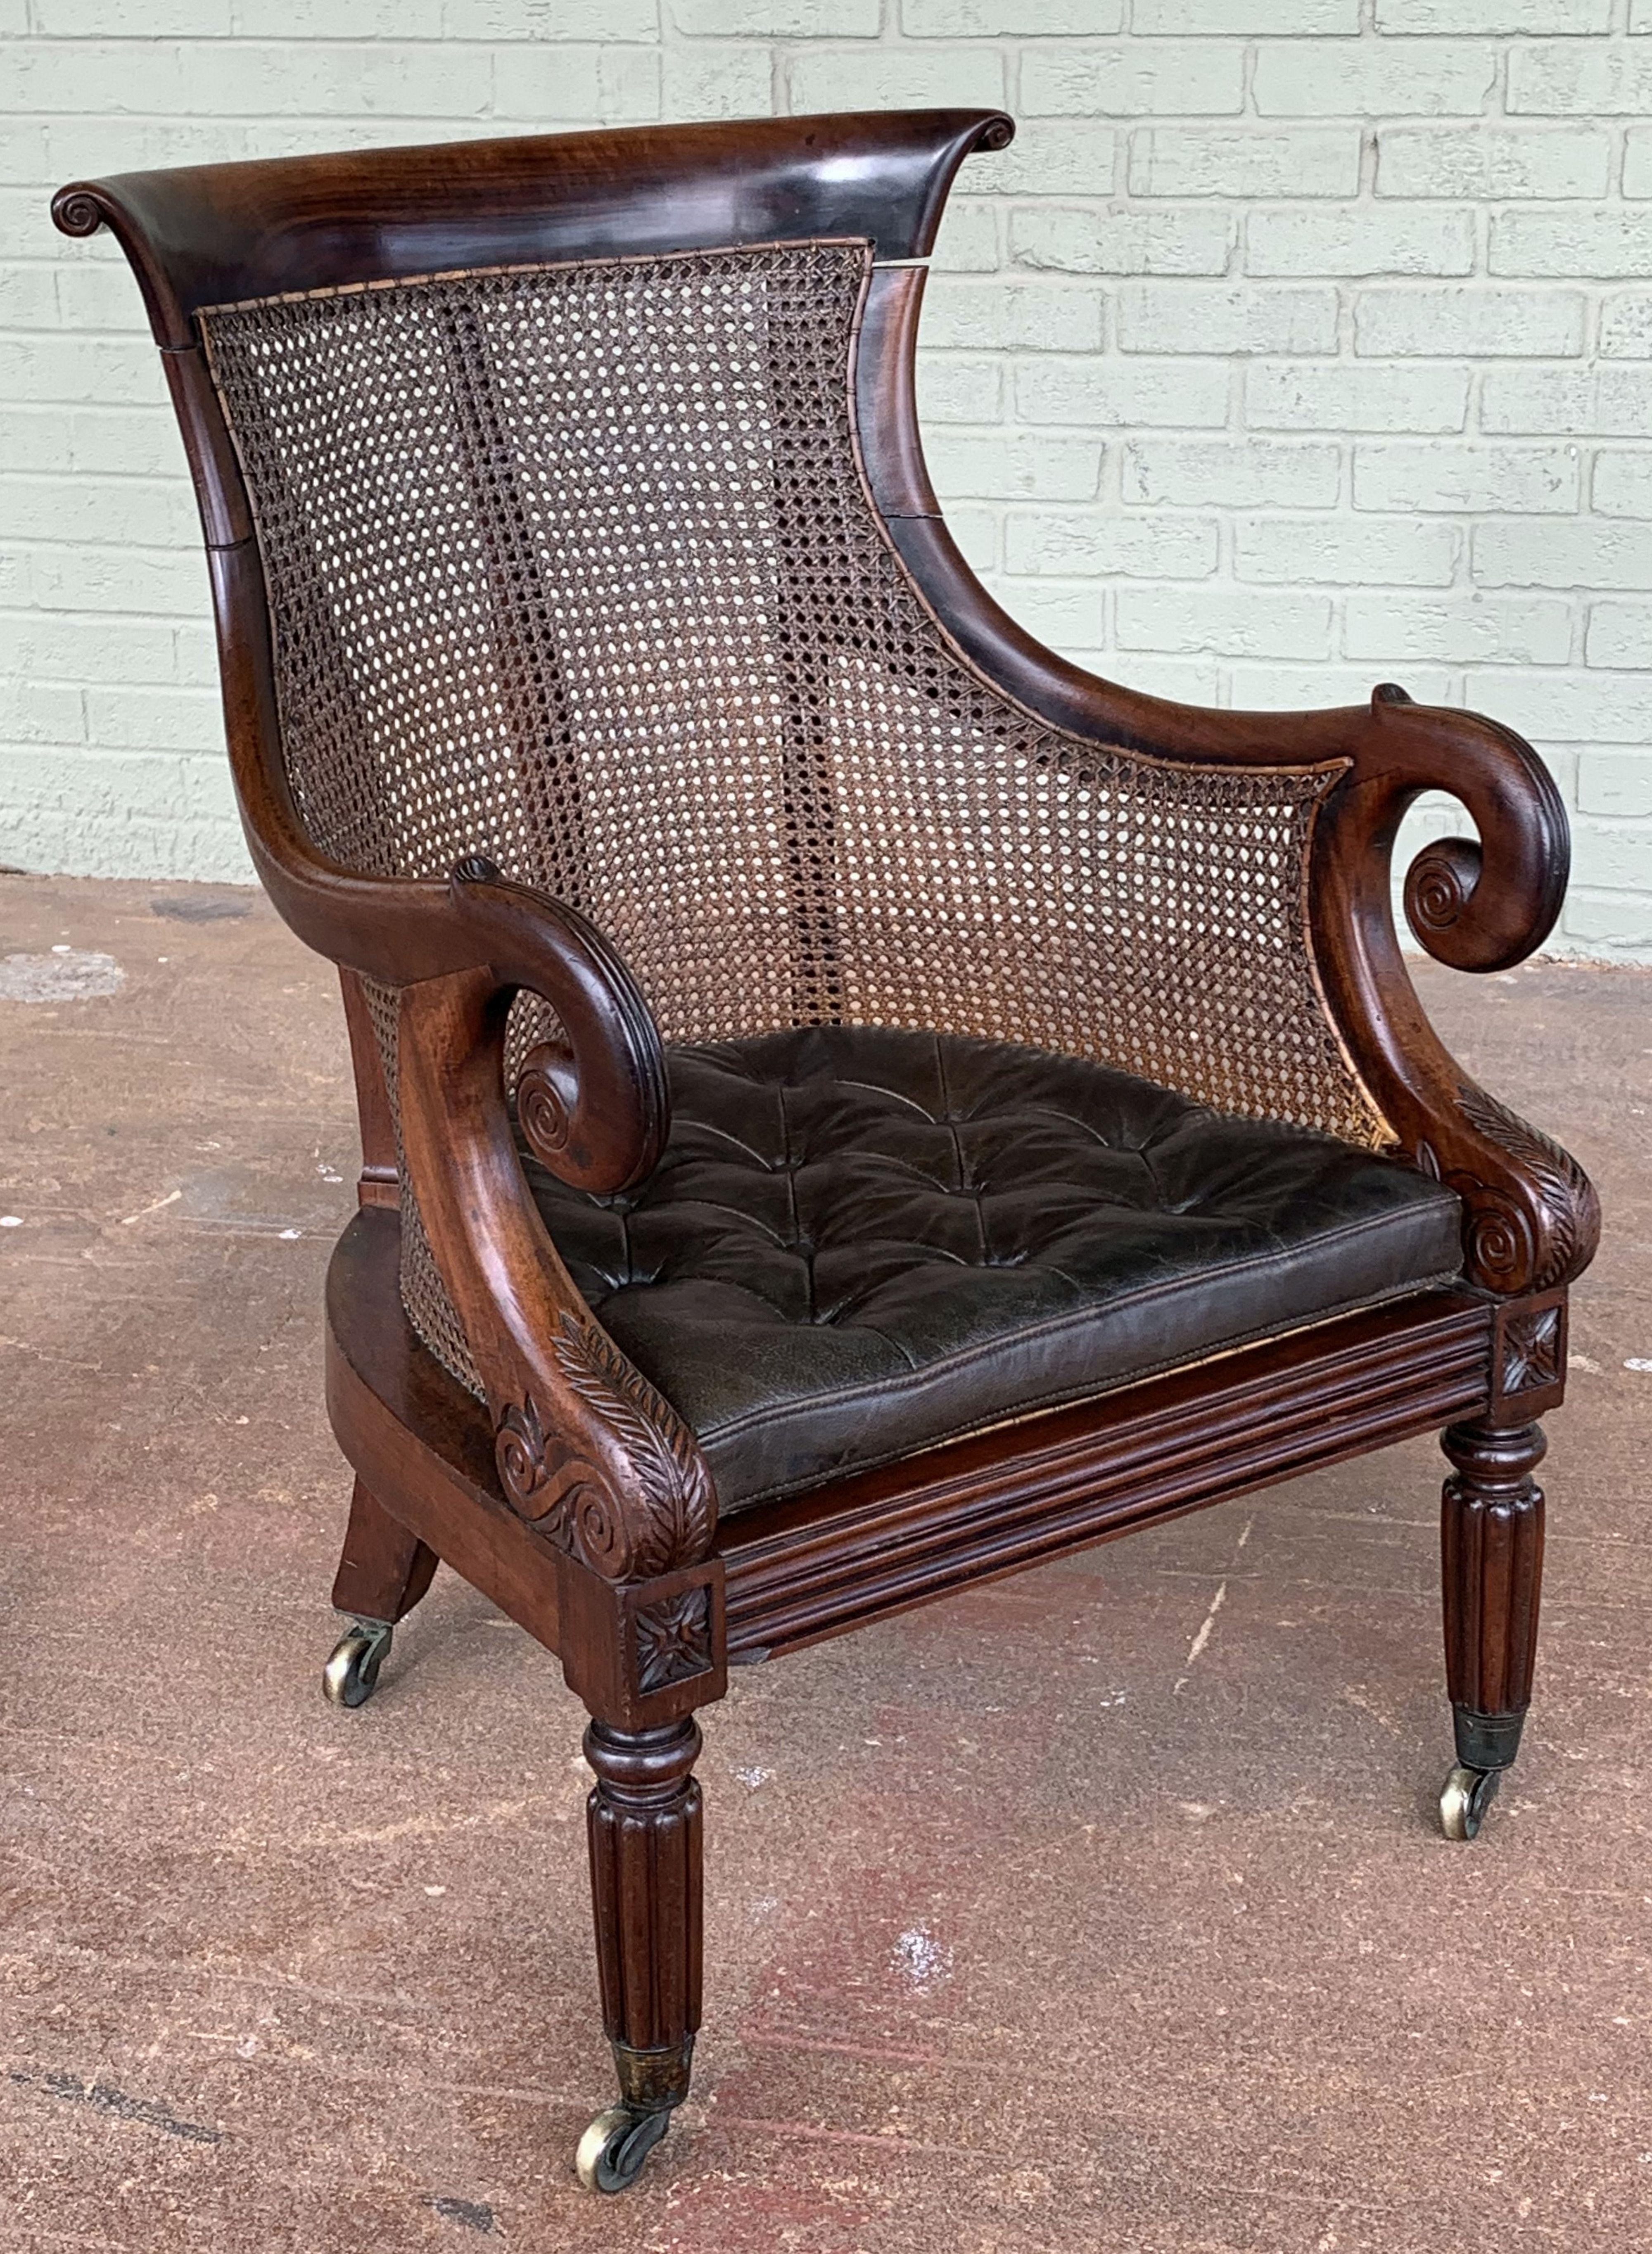 19th Century English Bergere Armchair of Caned Mahogany from the Regency Period